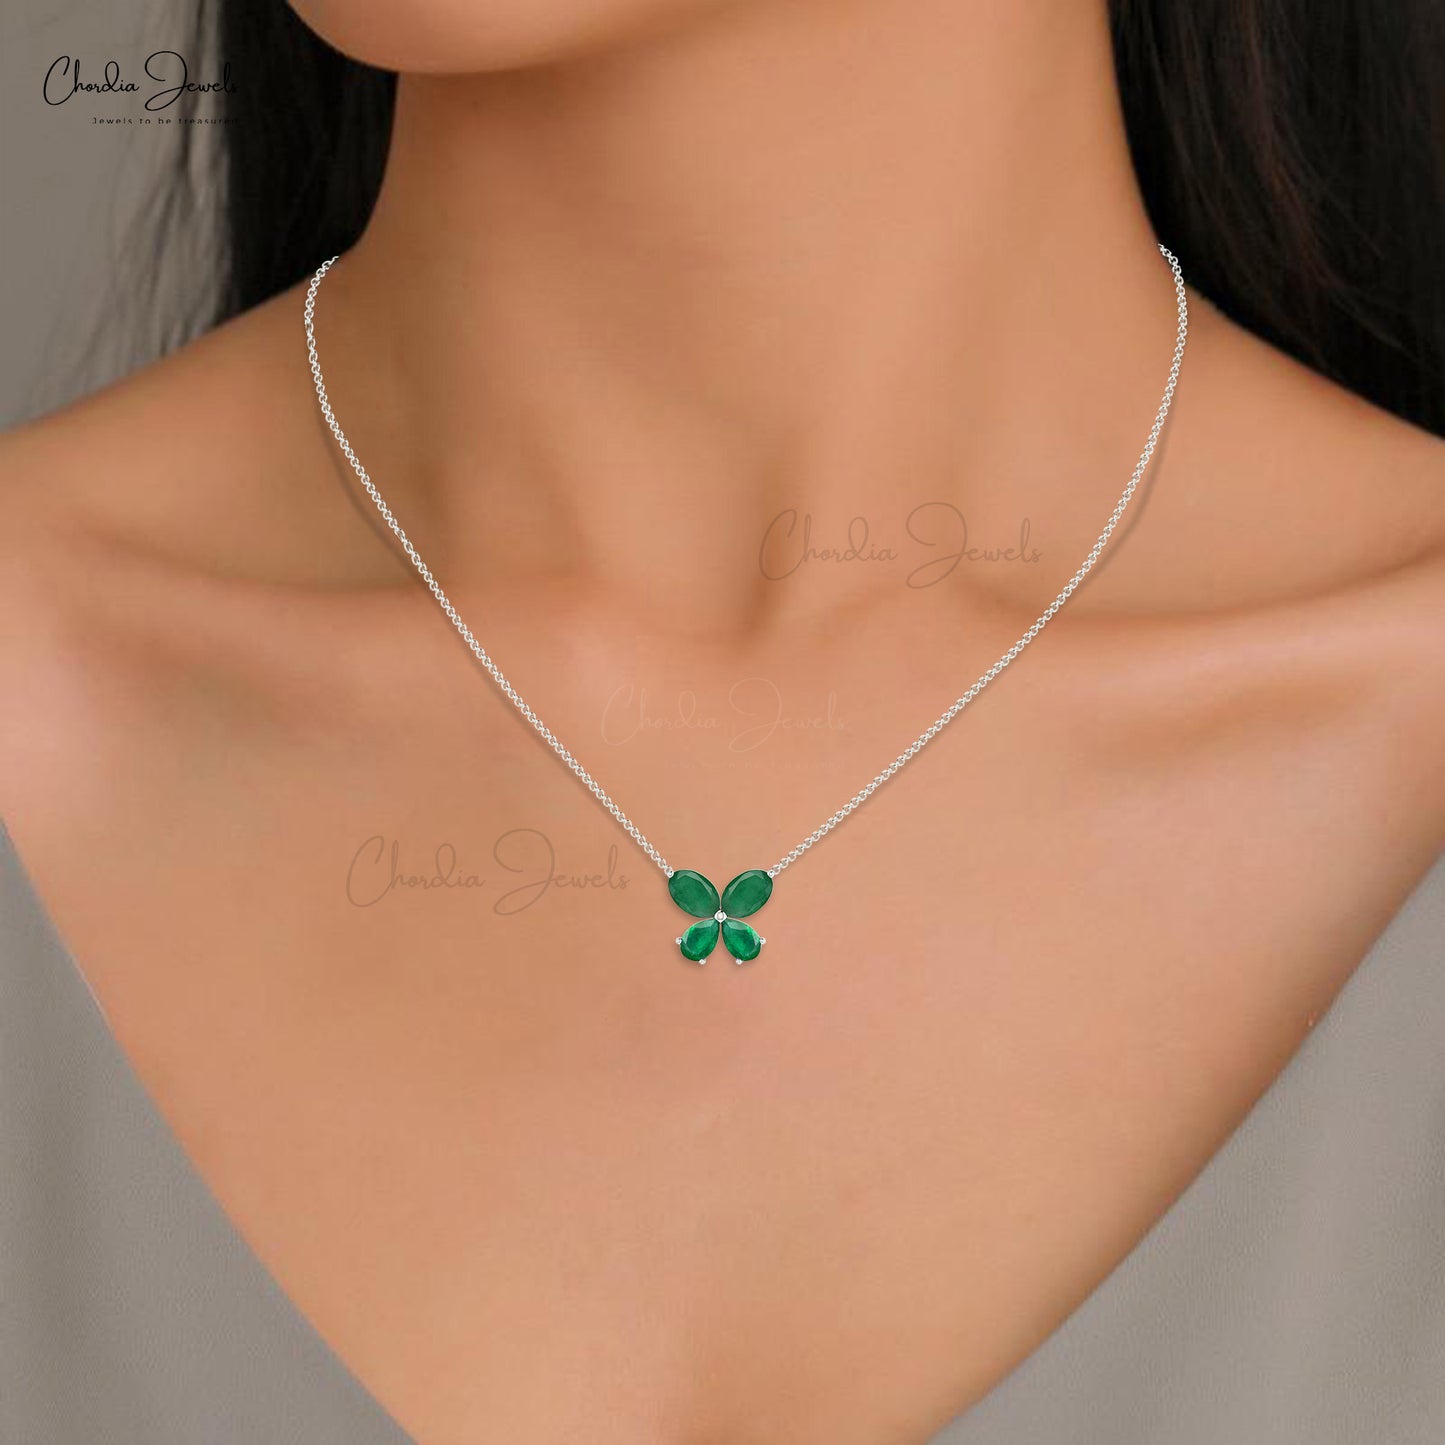 Load image into Gallery viewer, Dainty Butterfly Necklace Real 14k Gold Minimalistic Pendant Necklace Studded With Genuine Green Emerald Jewelry for Birthday Gift
